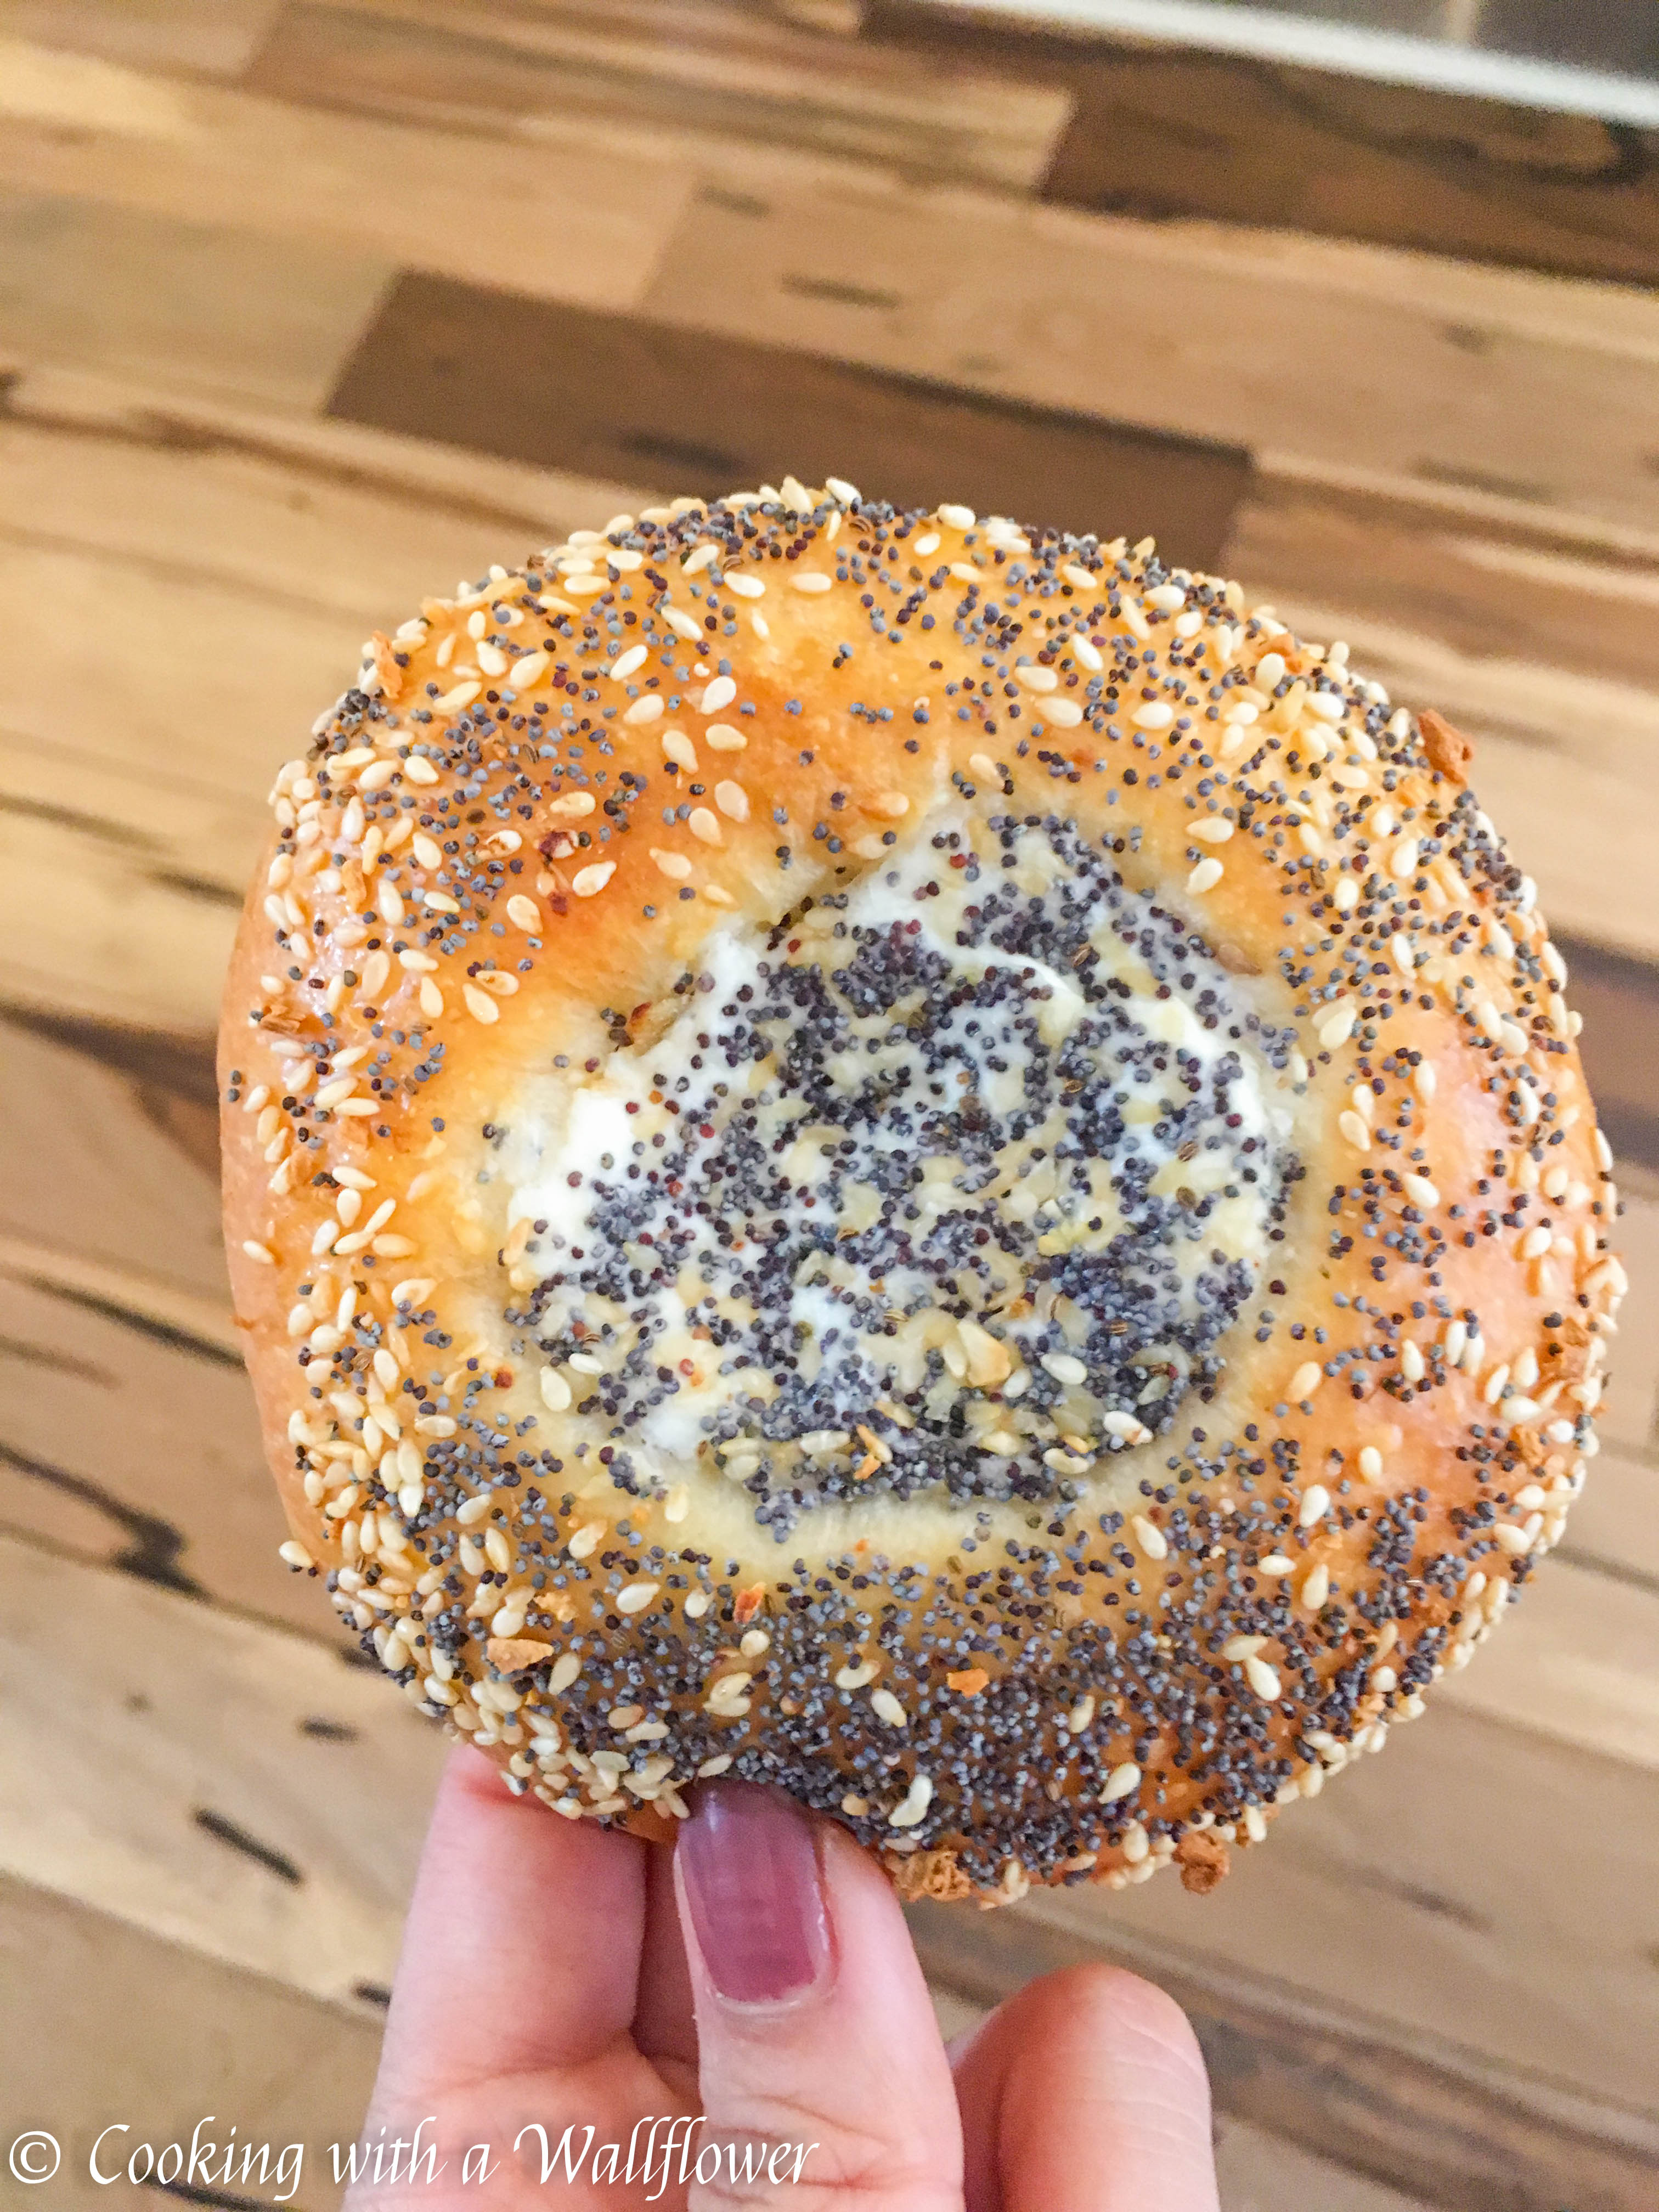 Everything but the Bagel Seasoning - Belly Rumbles